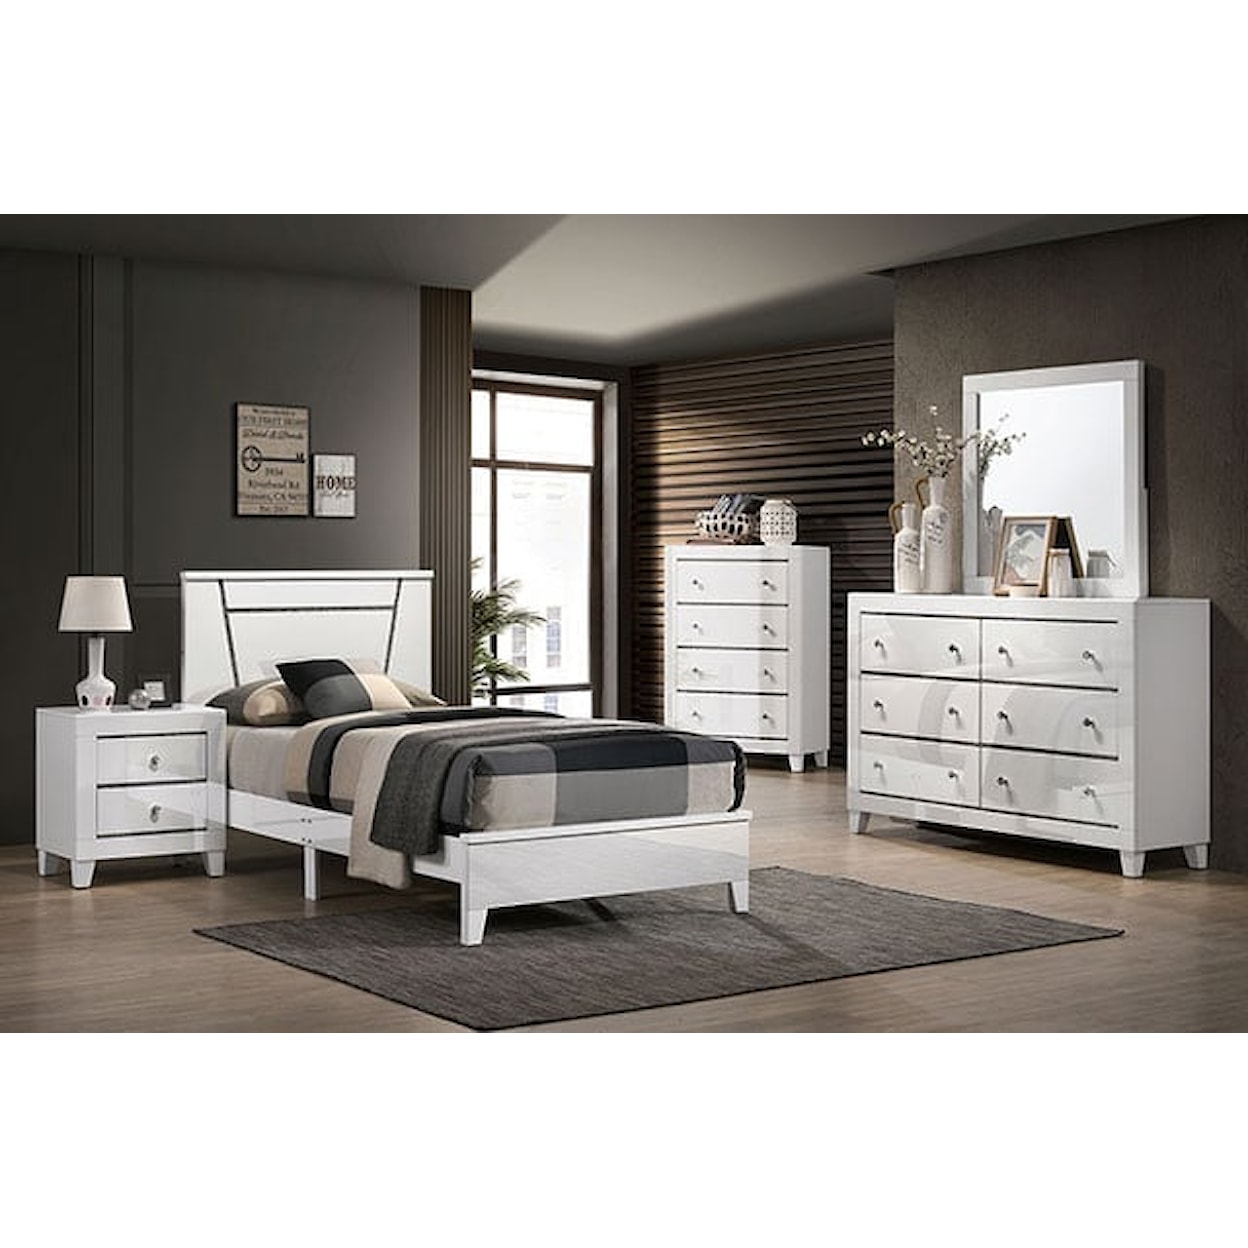 Furniture of America Magdeburg Twin Youth Bedroom Group